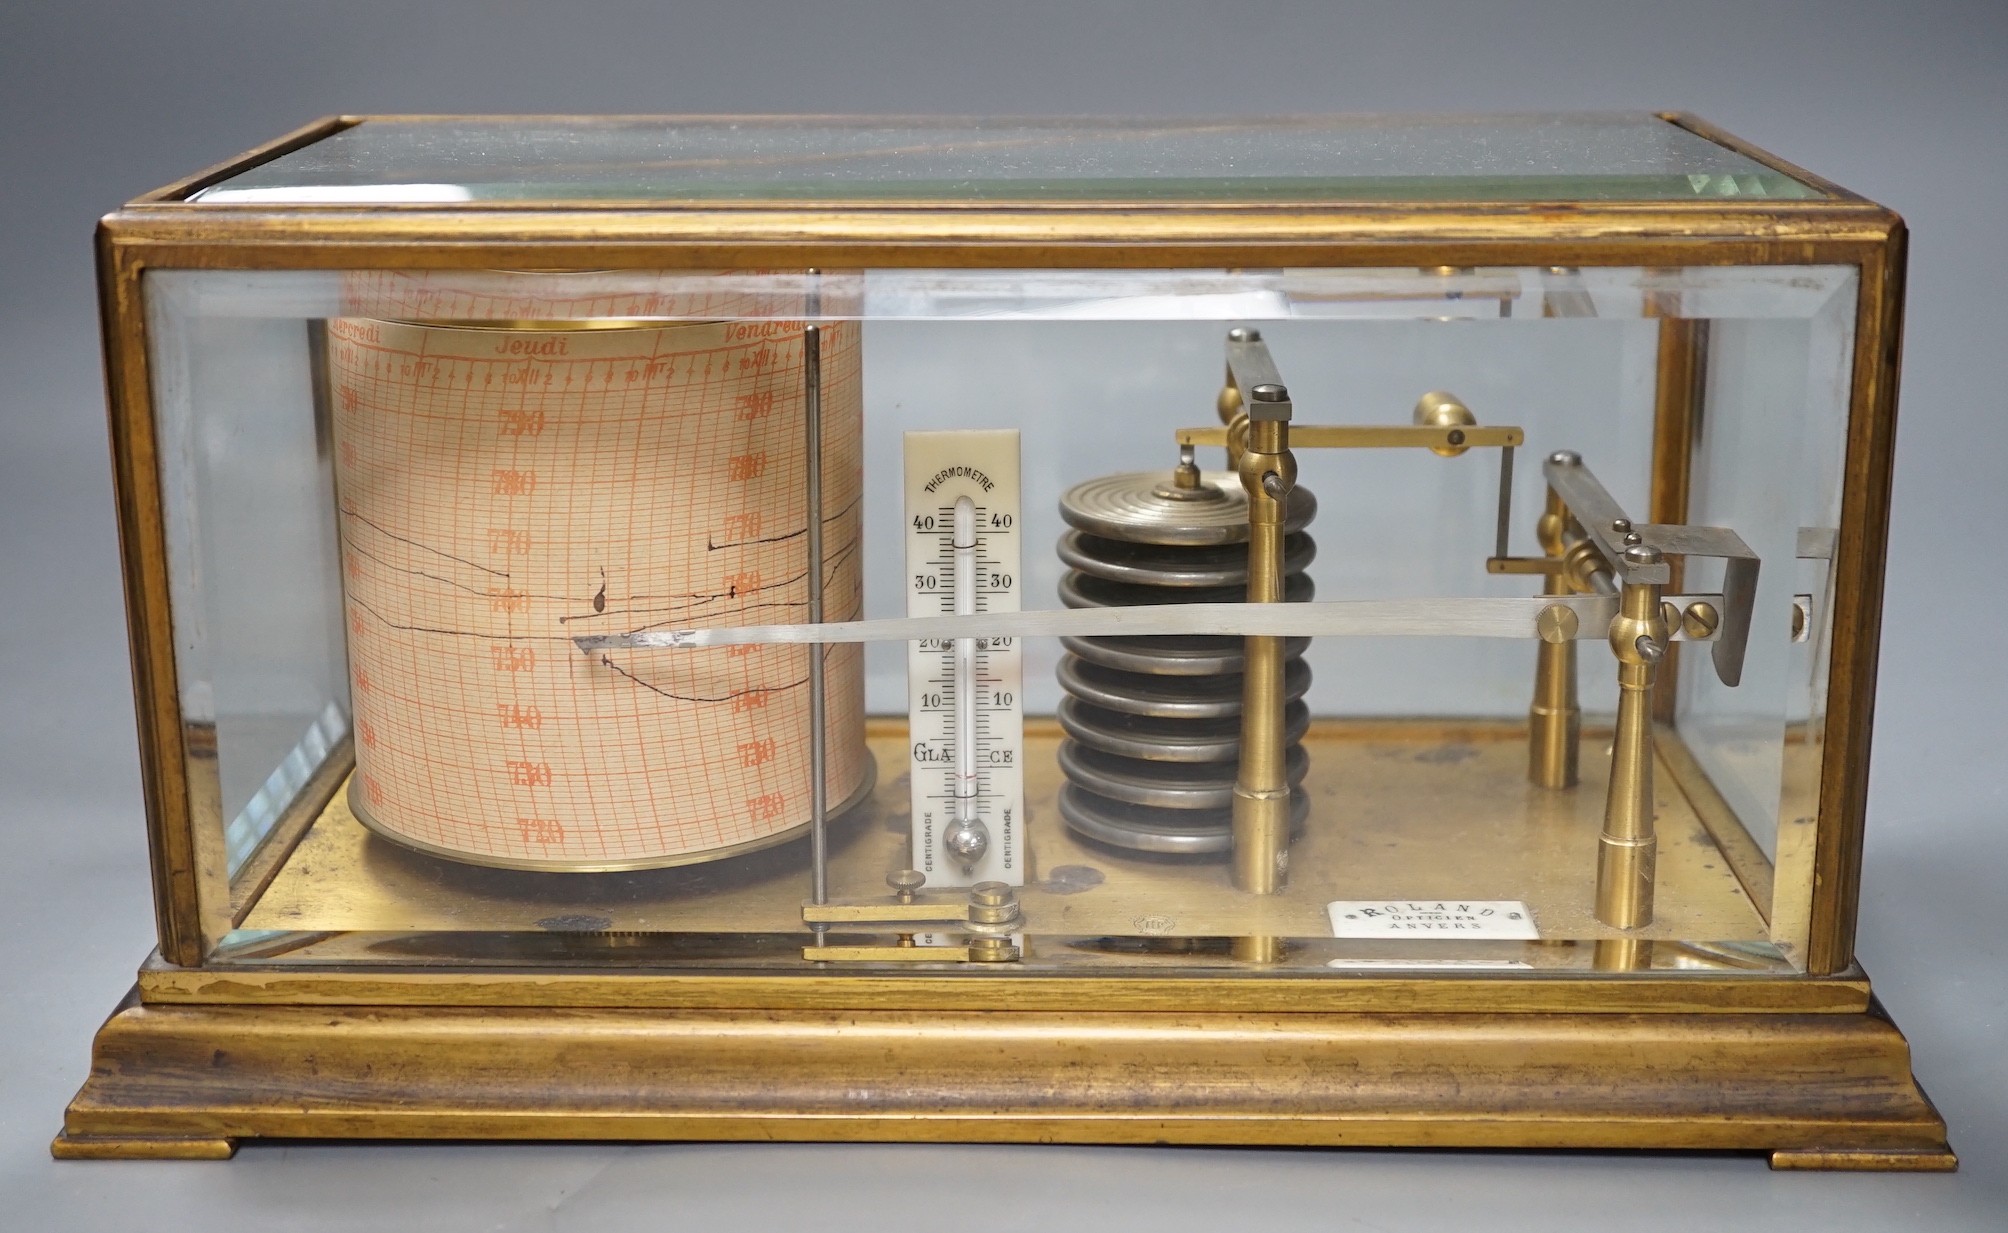 A French brass cased barograph, early 20th century, retailed by Roland, Anvers, number 65830, with ivory thermometer scale and retailers plaque, 30 cm wide                                                                 